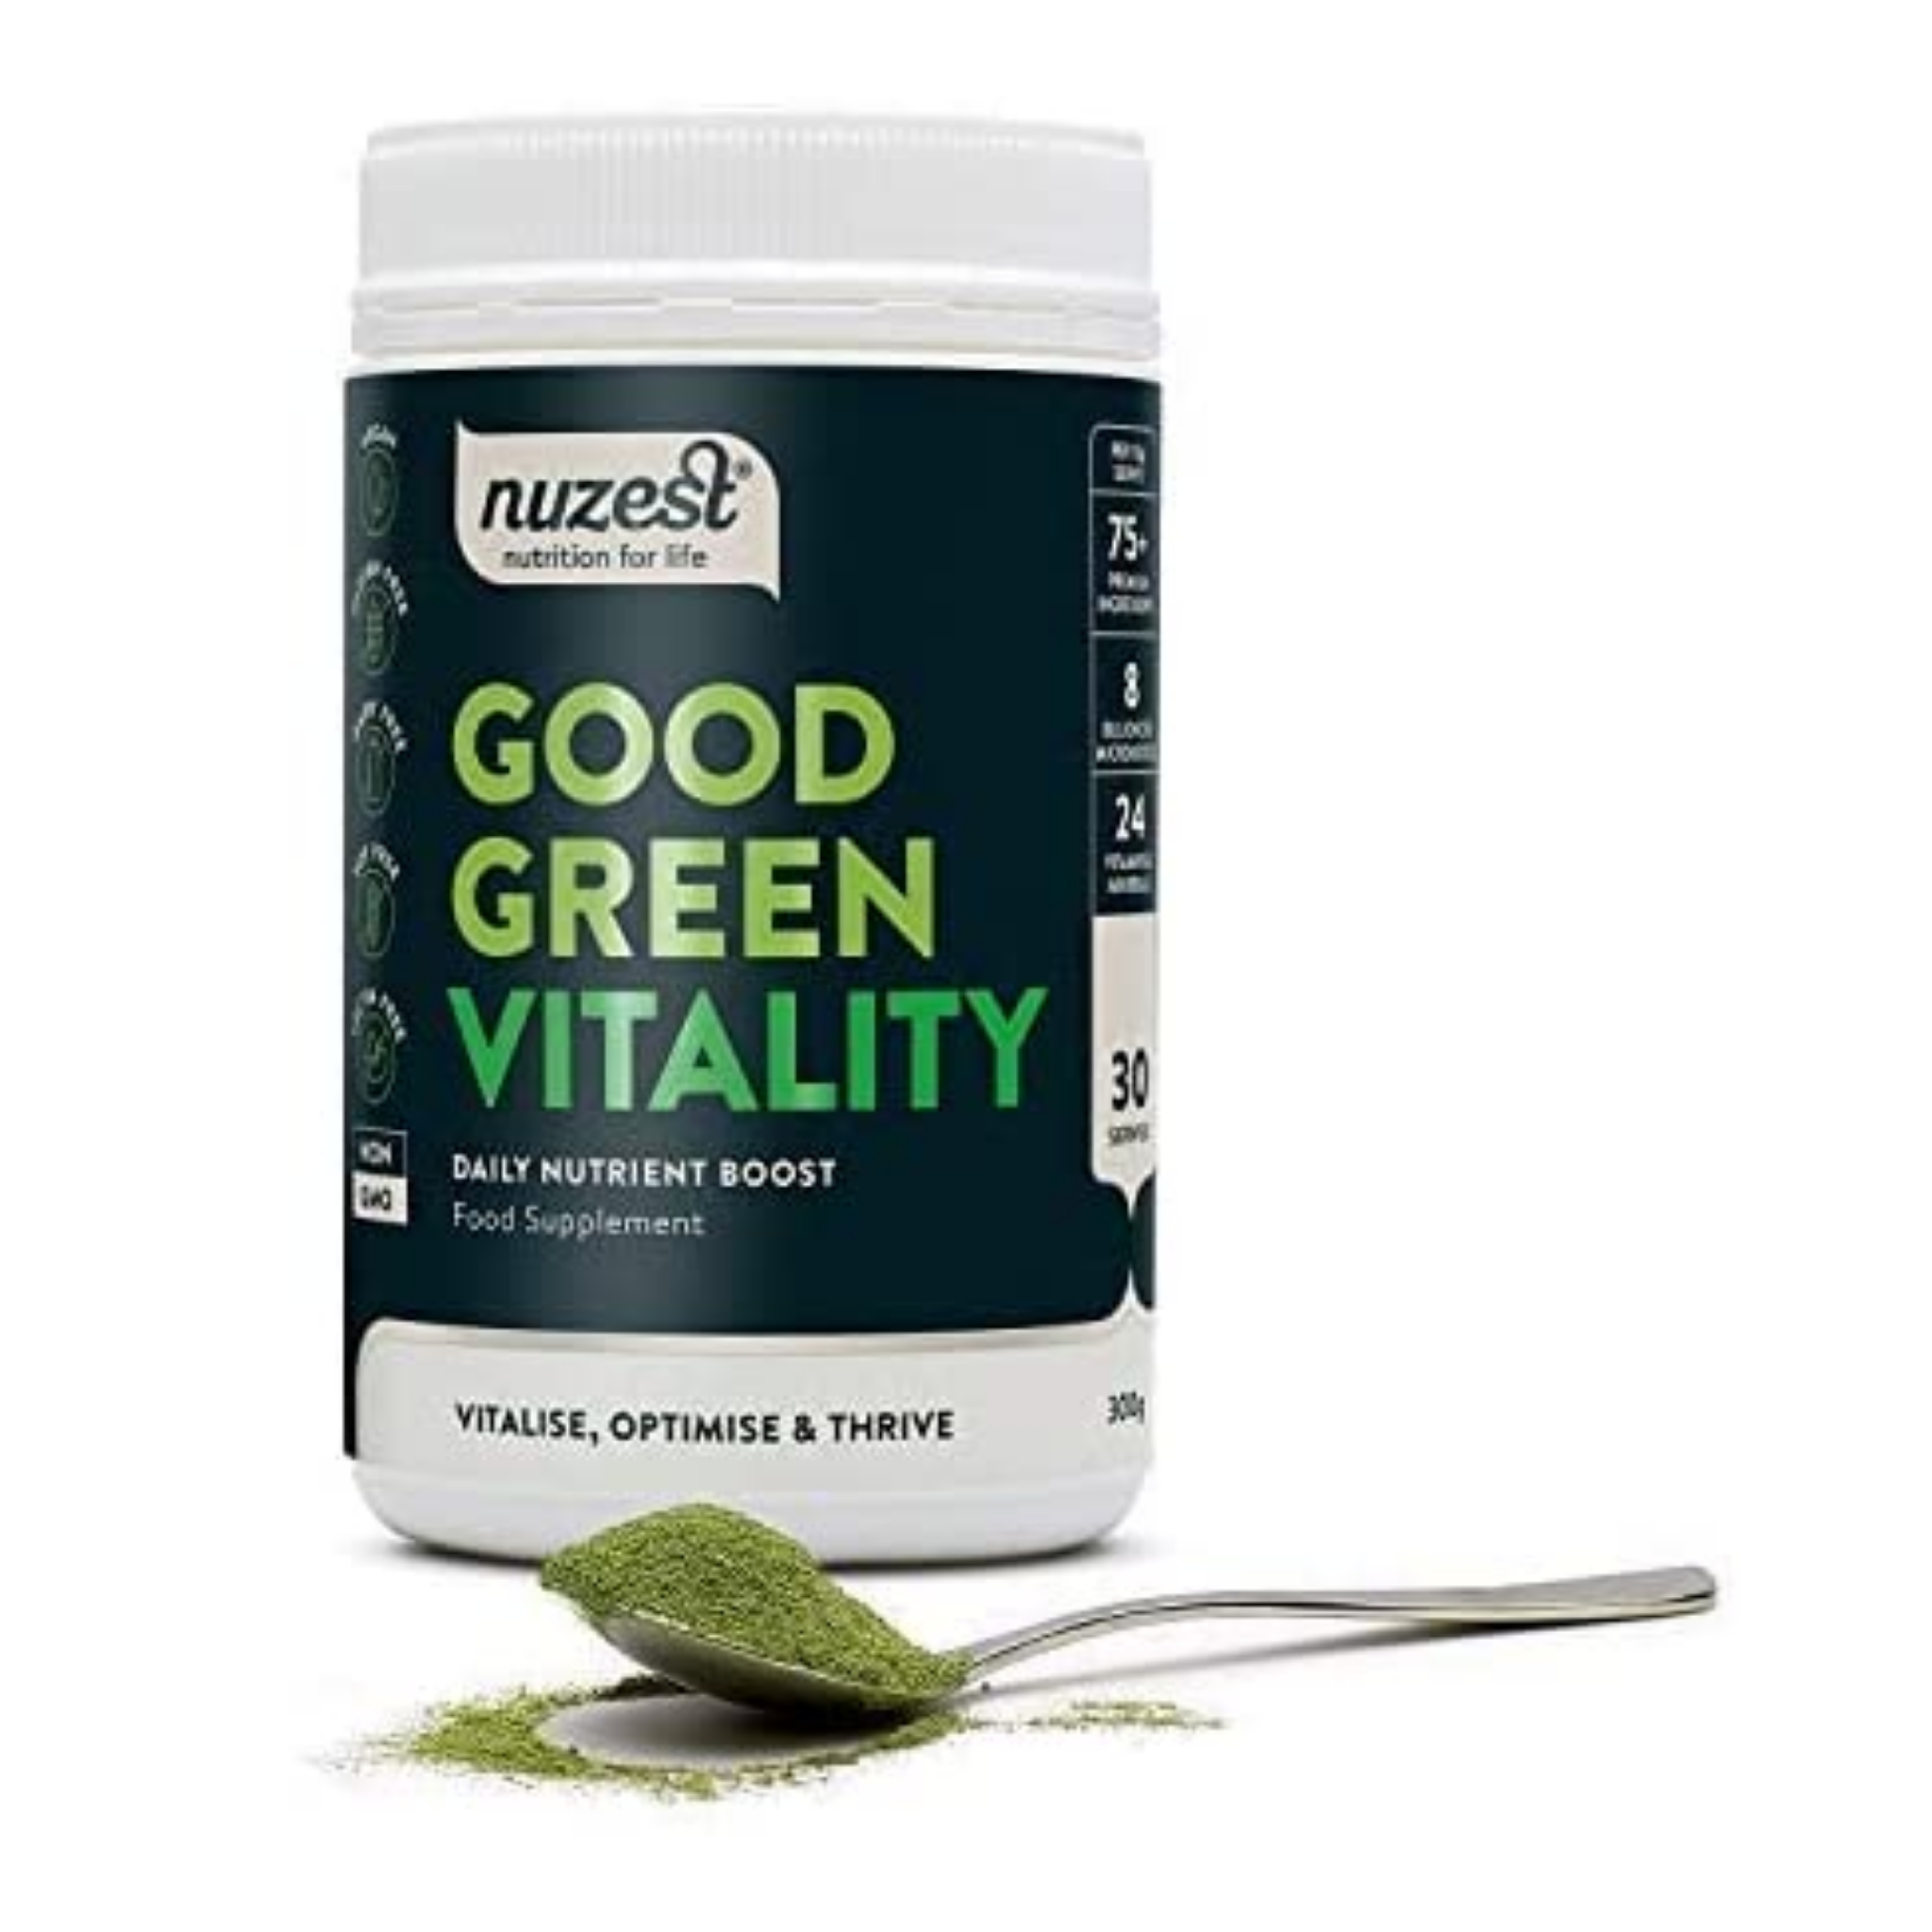 Nuzest Good Green Vitality, Refreshingly Natural